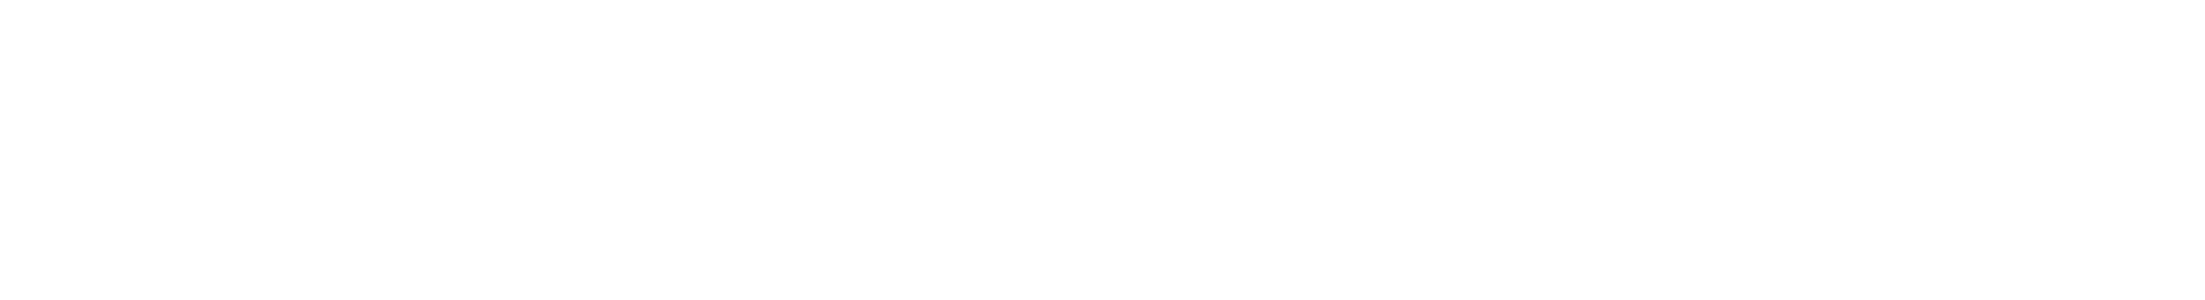 lottery_300.png